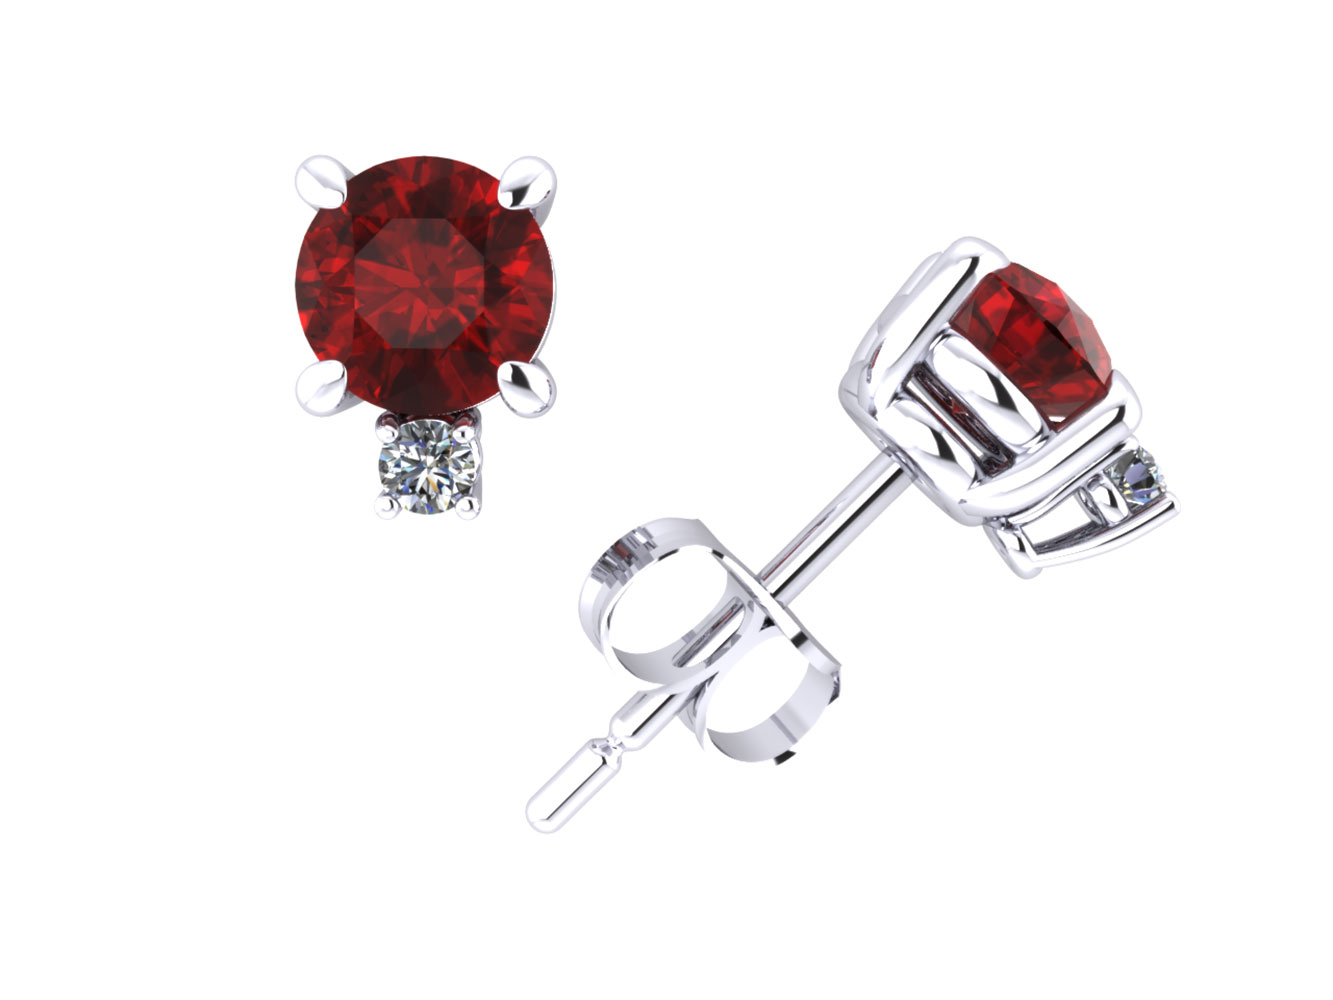 Jewel We Sell 0.50Ct Round Ruby Solitaire Stud Earrings with Accents 14k White or Yellow Gold Prong AAA Quality